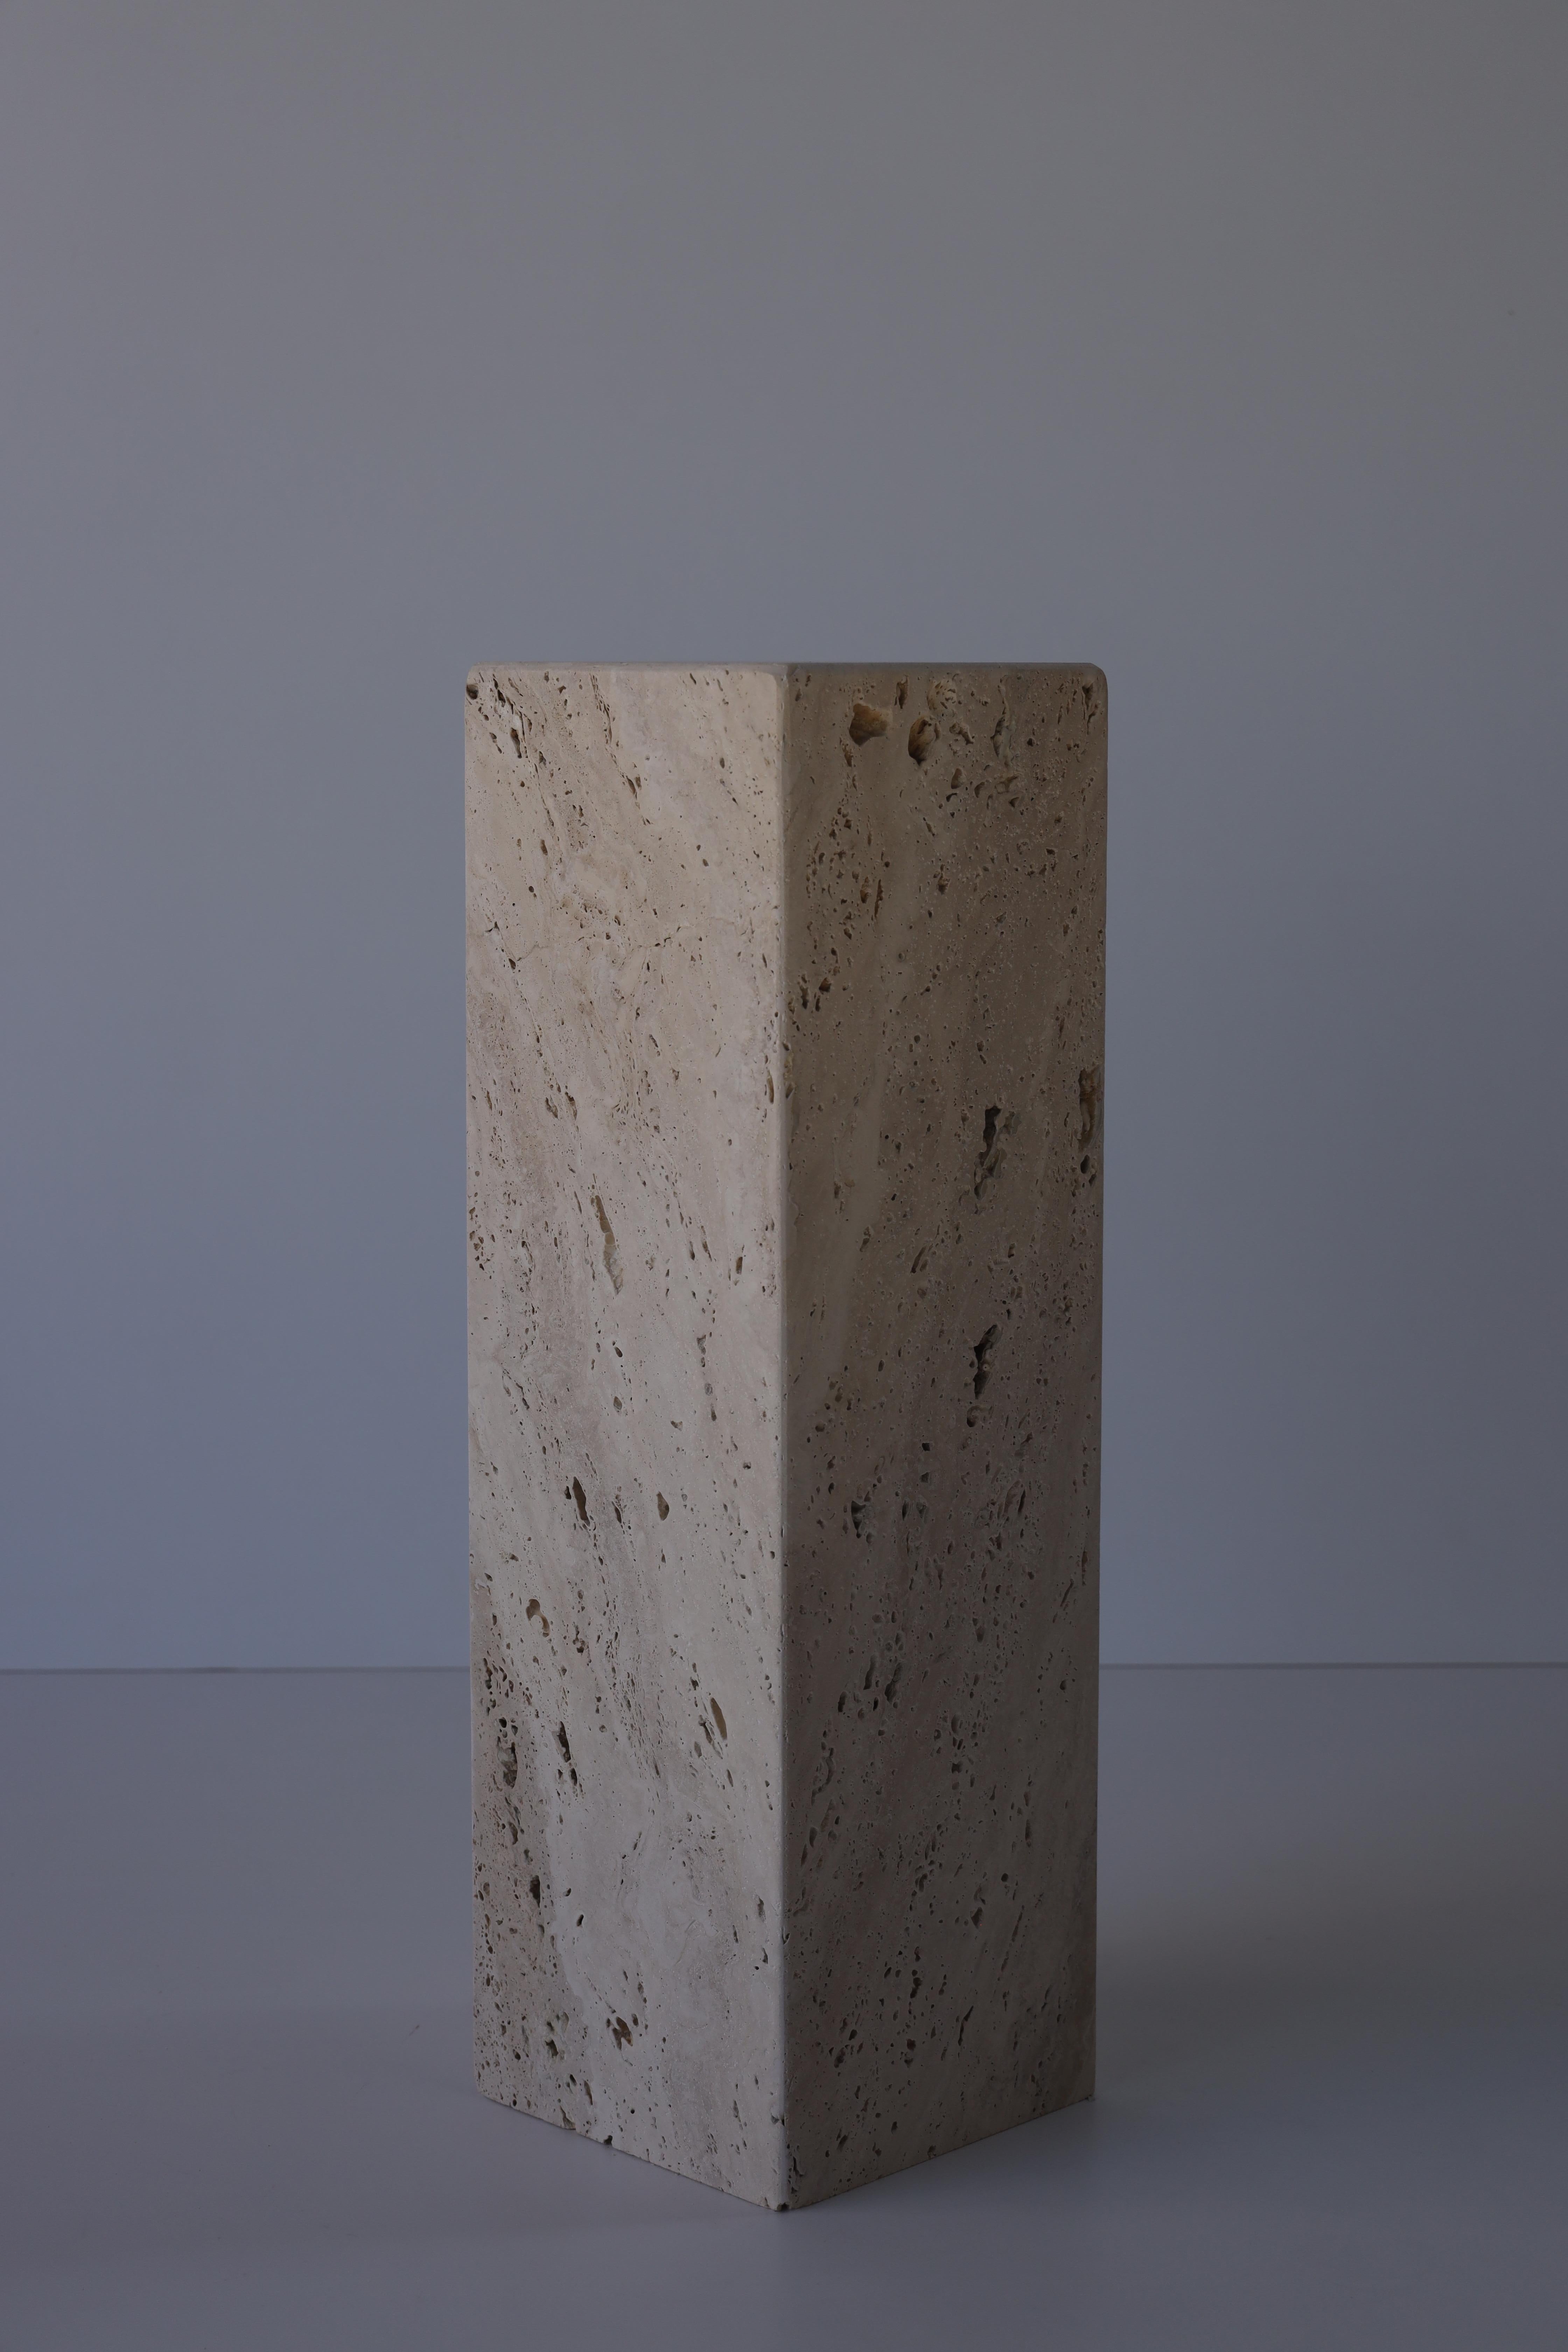 The Ascolane Travertine pedestal is a stunning and elegant piece of natural stone craftsmanship that embodies both timeless beauty and functional design. Carved from exquisite Ascolane Travertine, a distinct variety of travertine known for its warm,